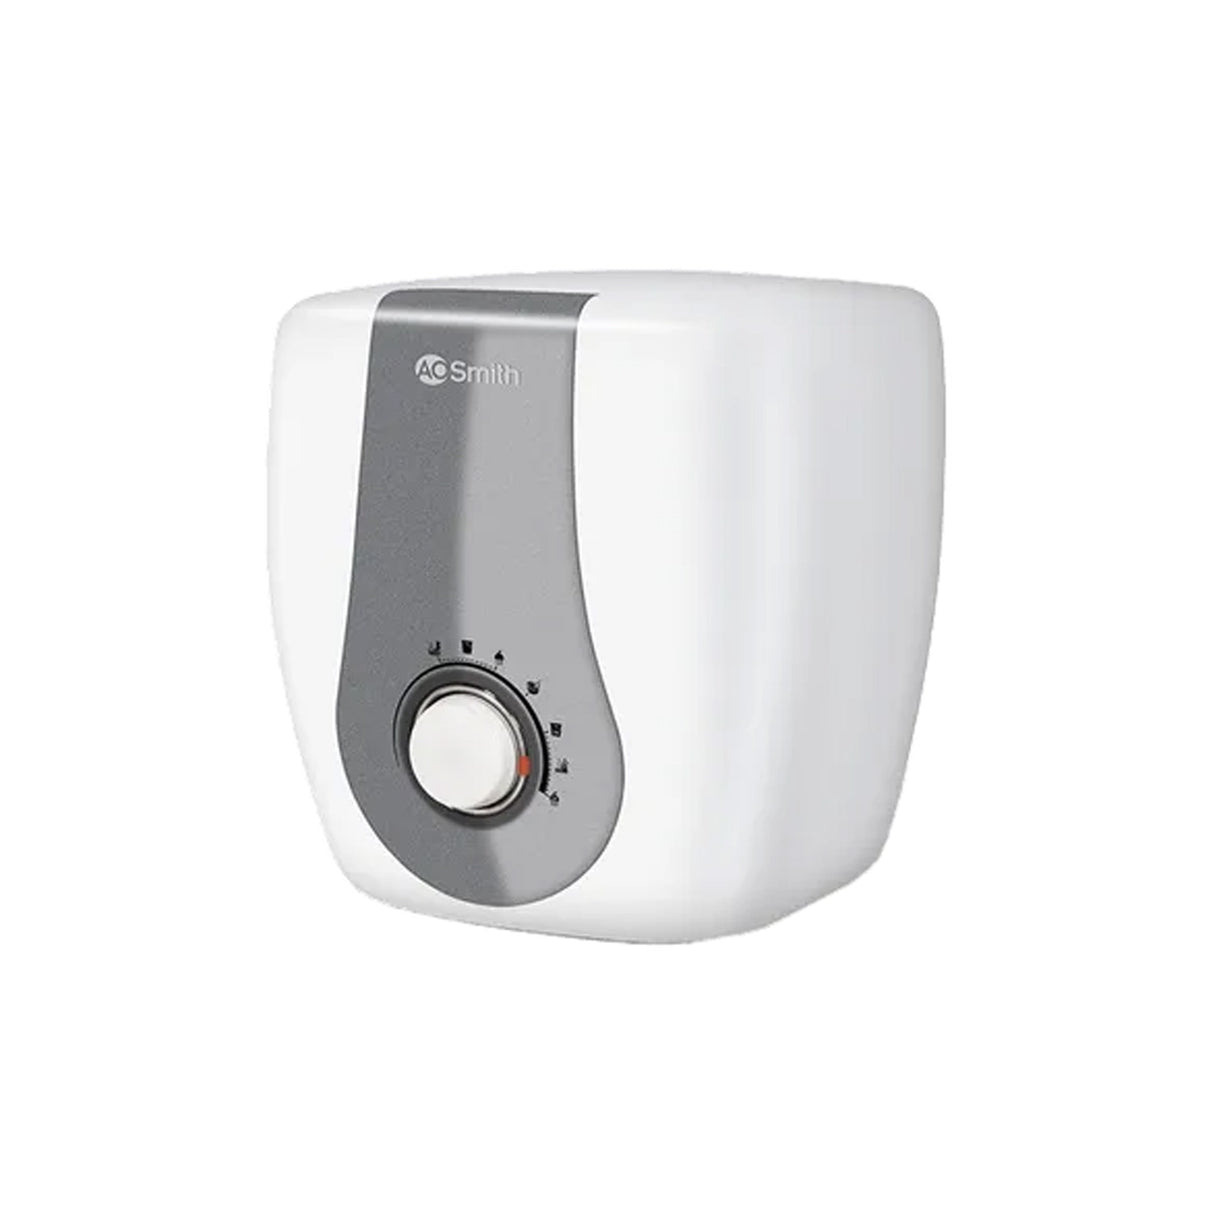 White AO Smith Finesse 25L Water Geyser – 5-Star Rated and Efficient Water Heater.